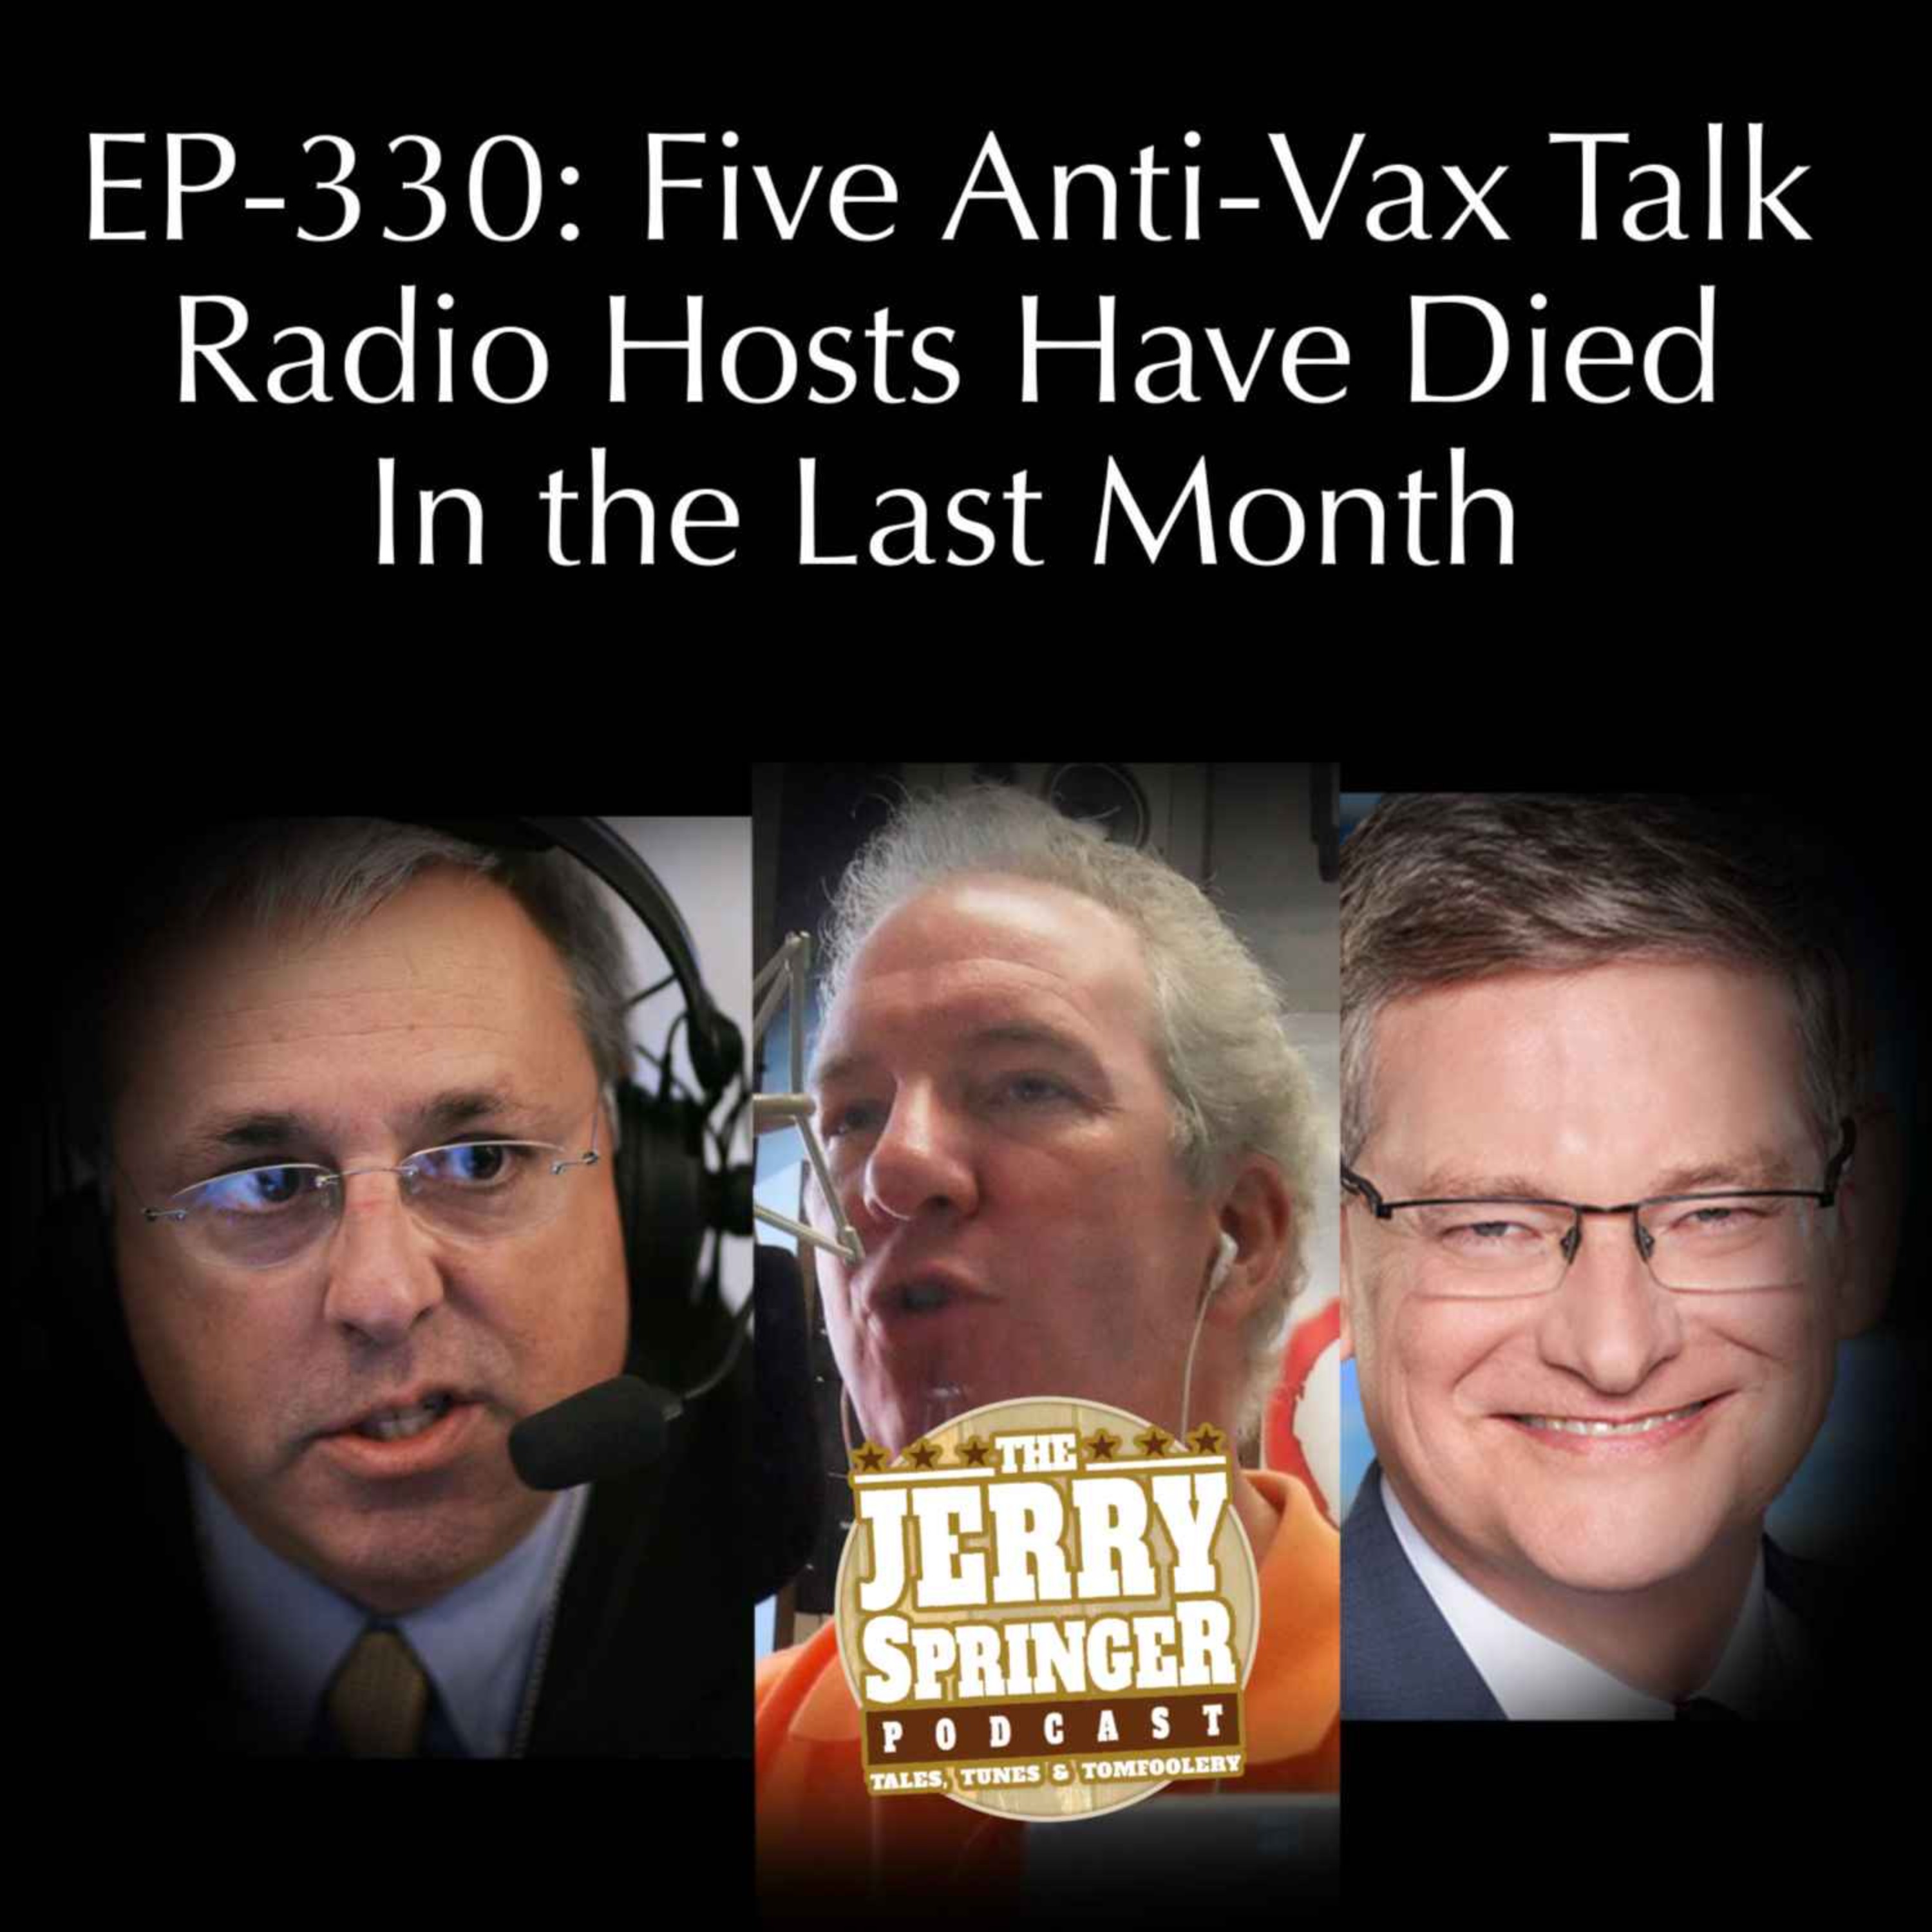 Five Anti-Vax Talk Radio Hosts Have Died In the Last Month: EP - 330